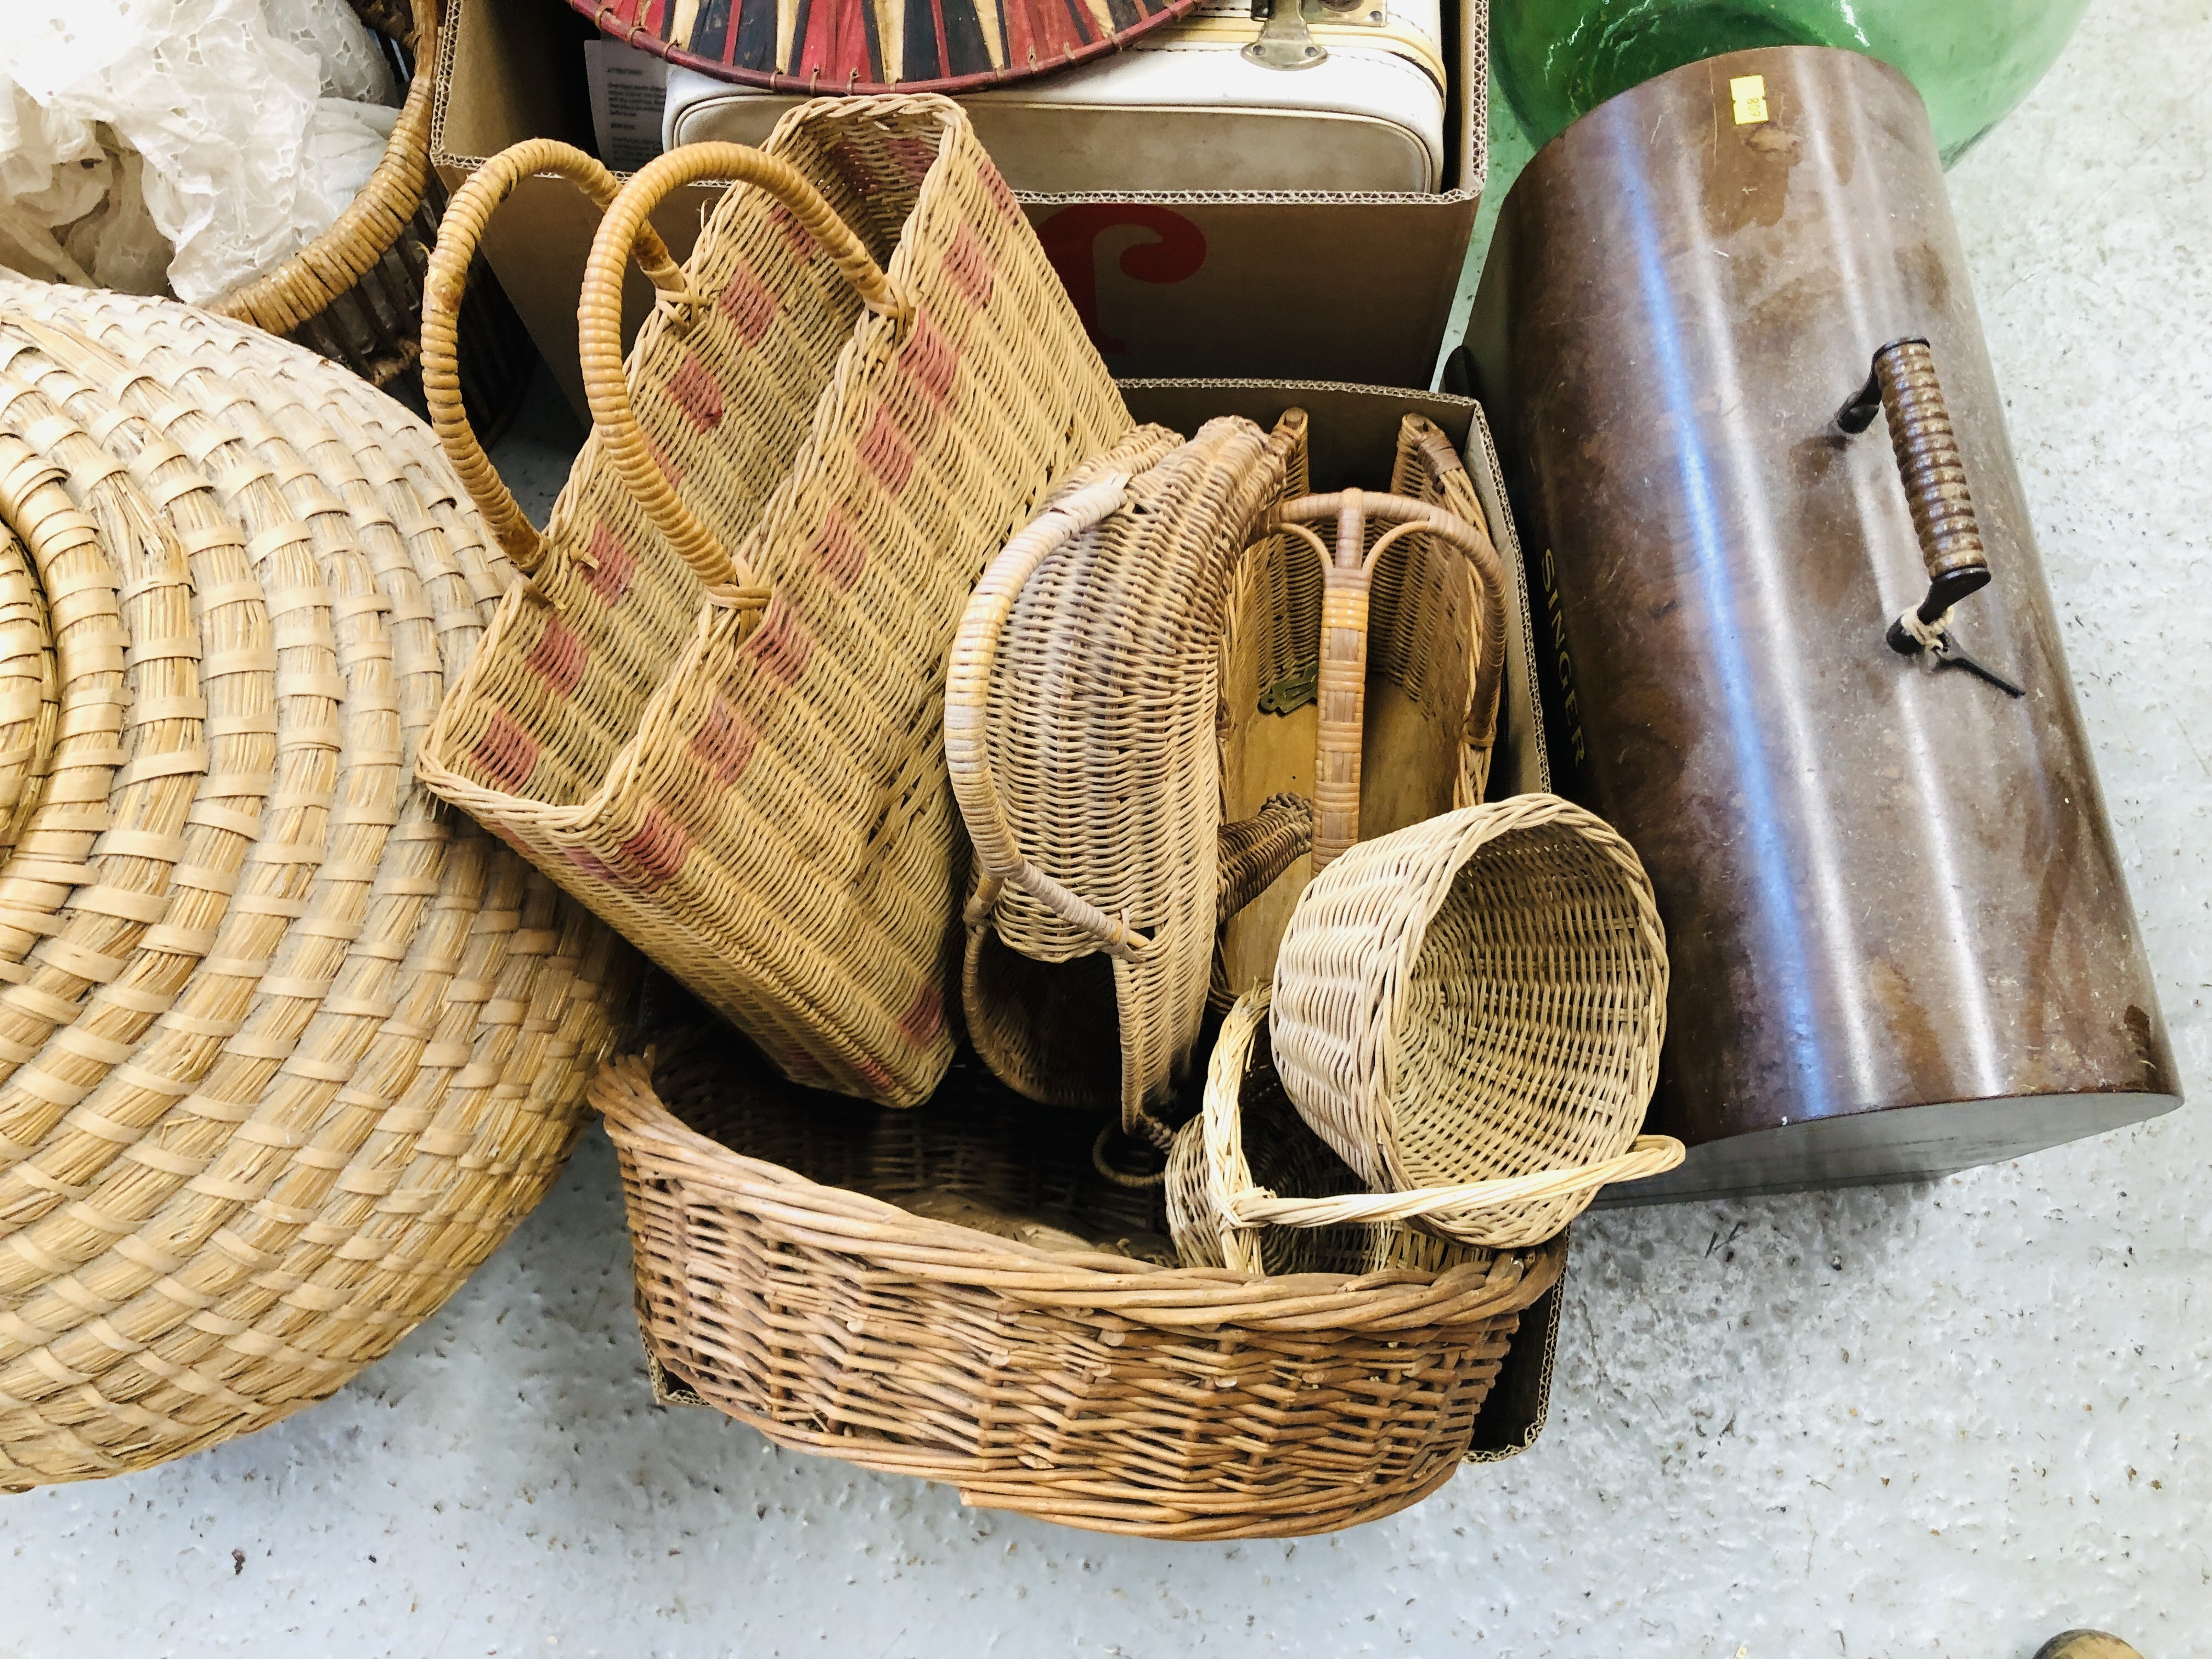 A COLLECTION OF VINTAGE EFFECTS TO INCLUDE BASKETS, SINGER SEWING MACHINE, TALA KITCHEN PRESS, - Image 7 of 10